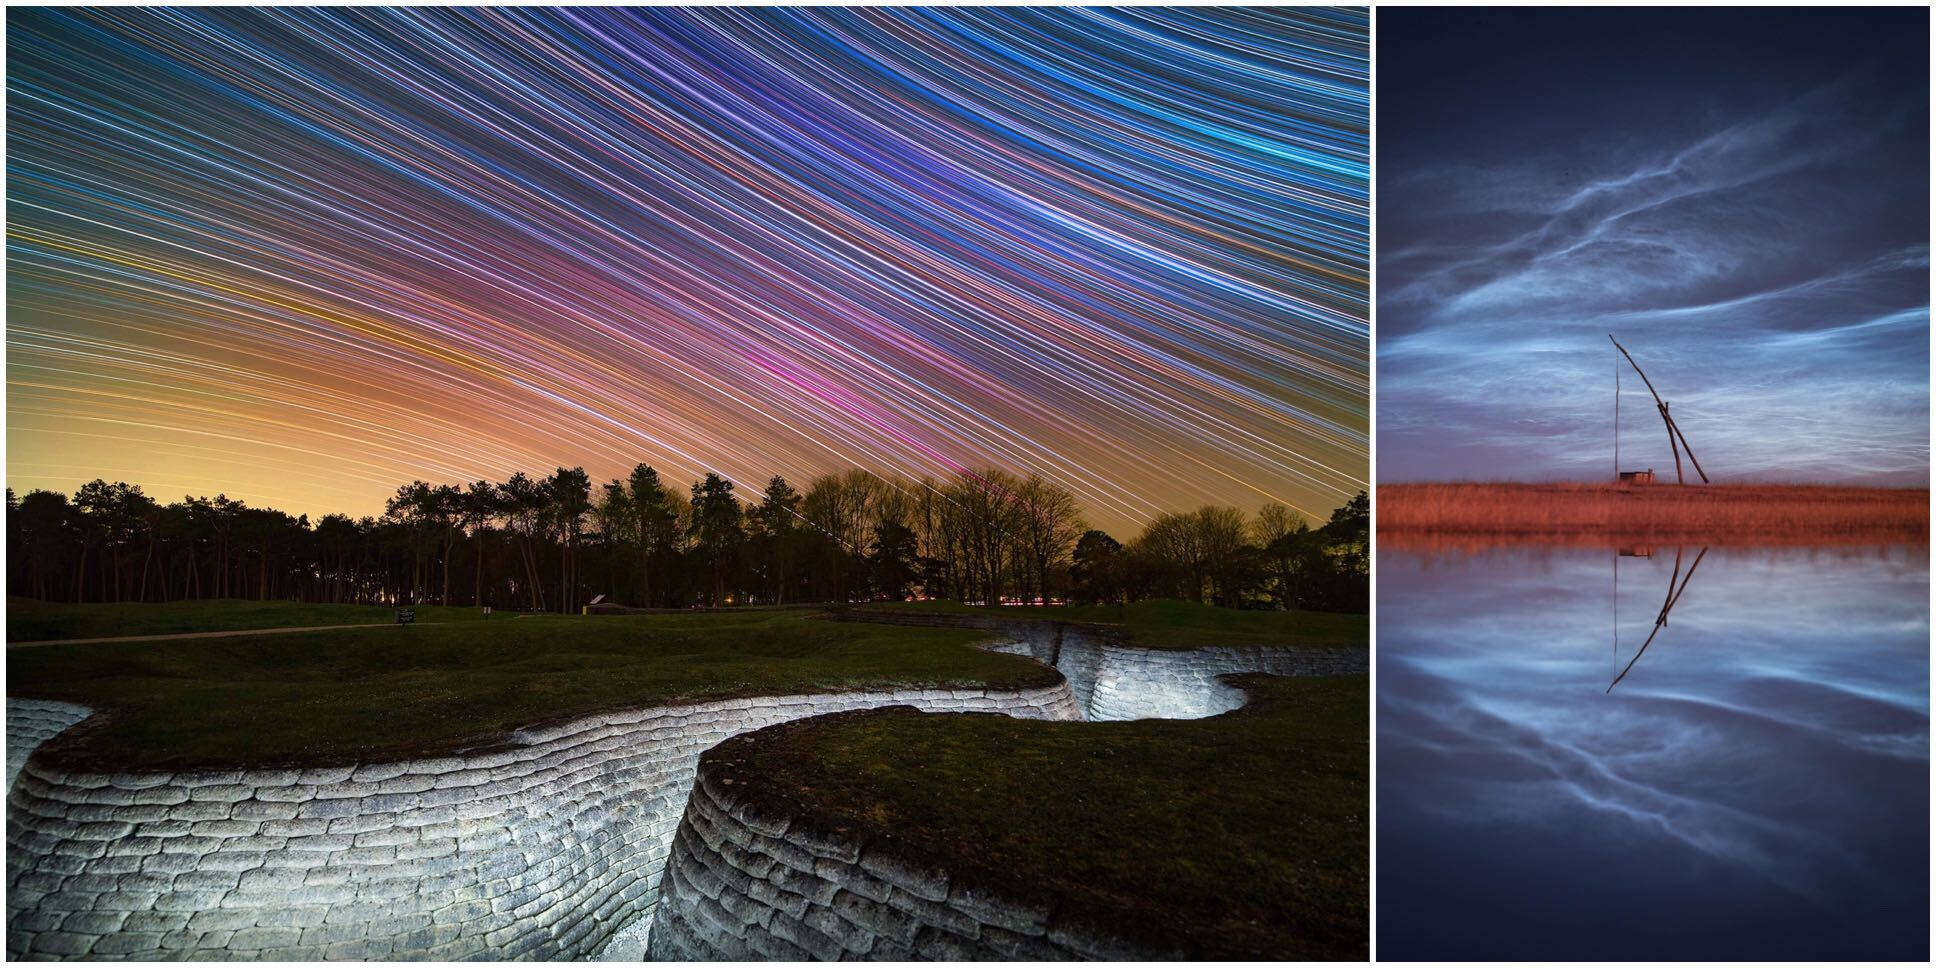 pictures of colorful startrails over a white-brick/sandbag-lined trench, and also a tall stickly structure in a gassy field by some water, which reflects wavy noctilucent clouds in the sky